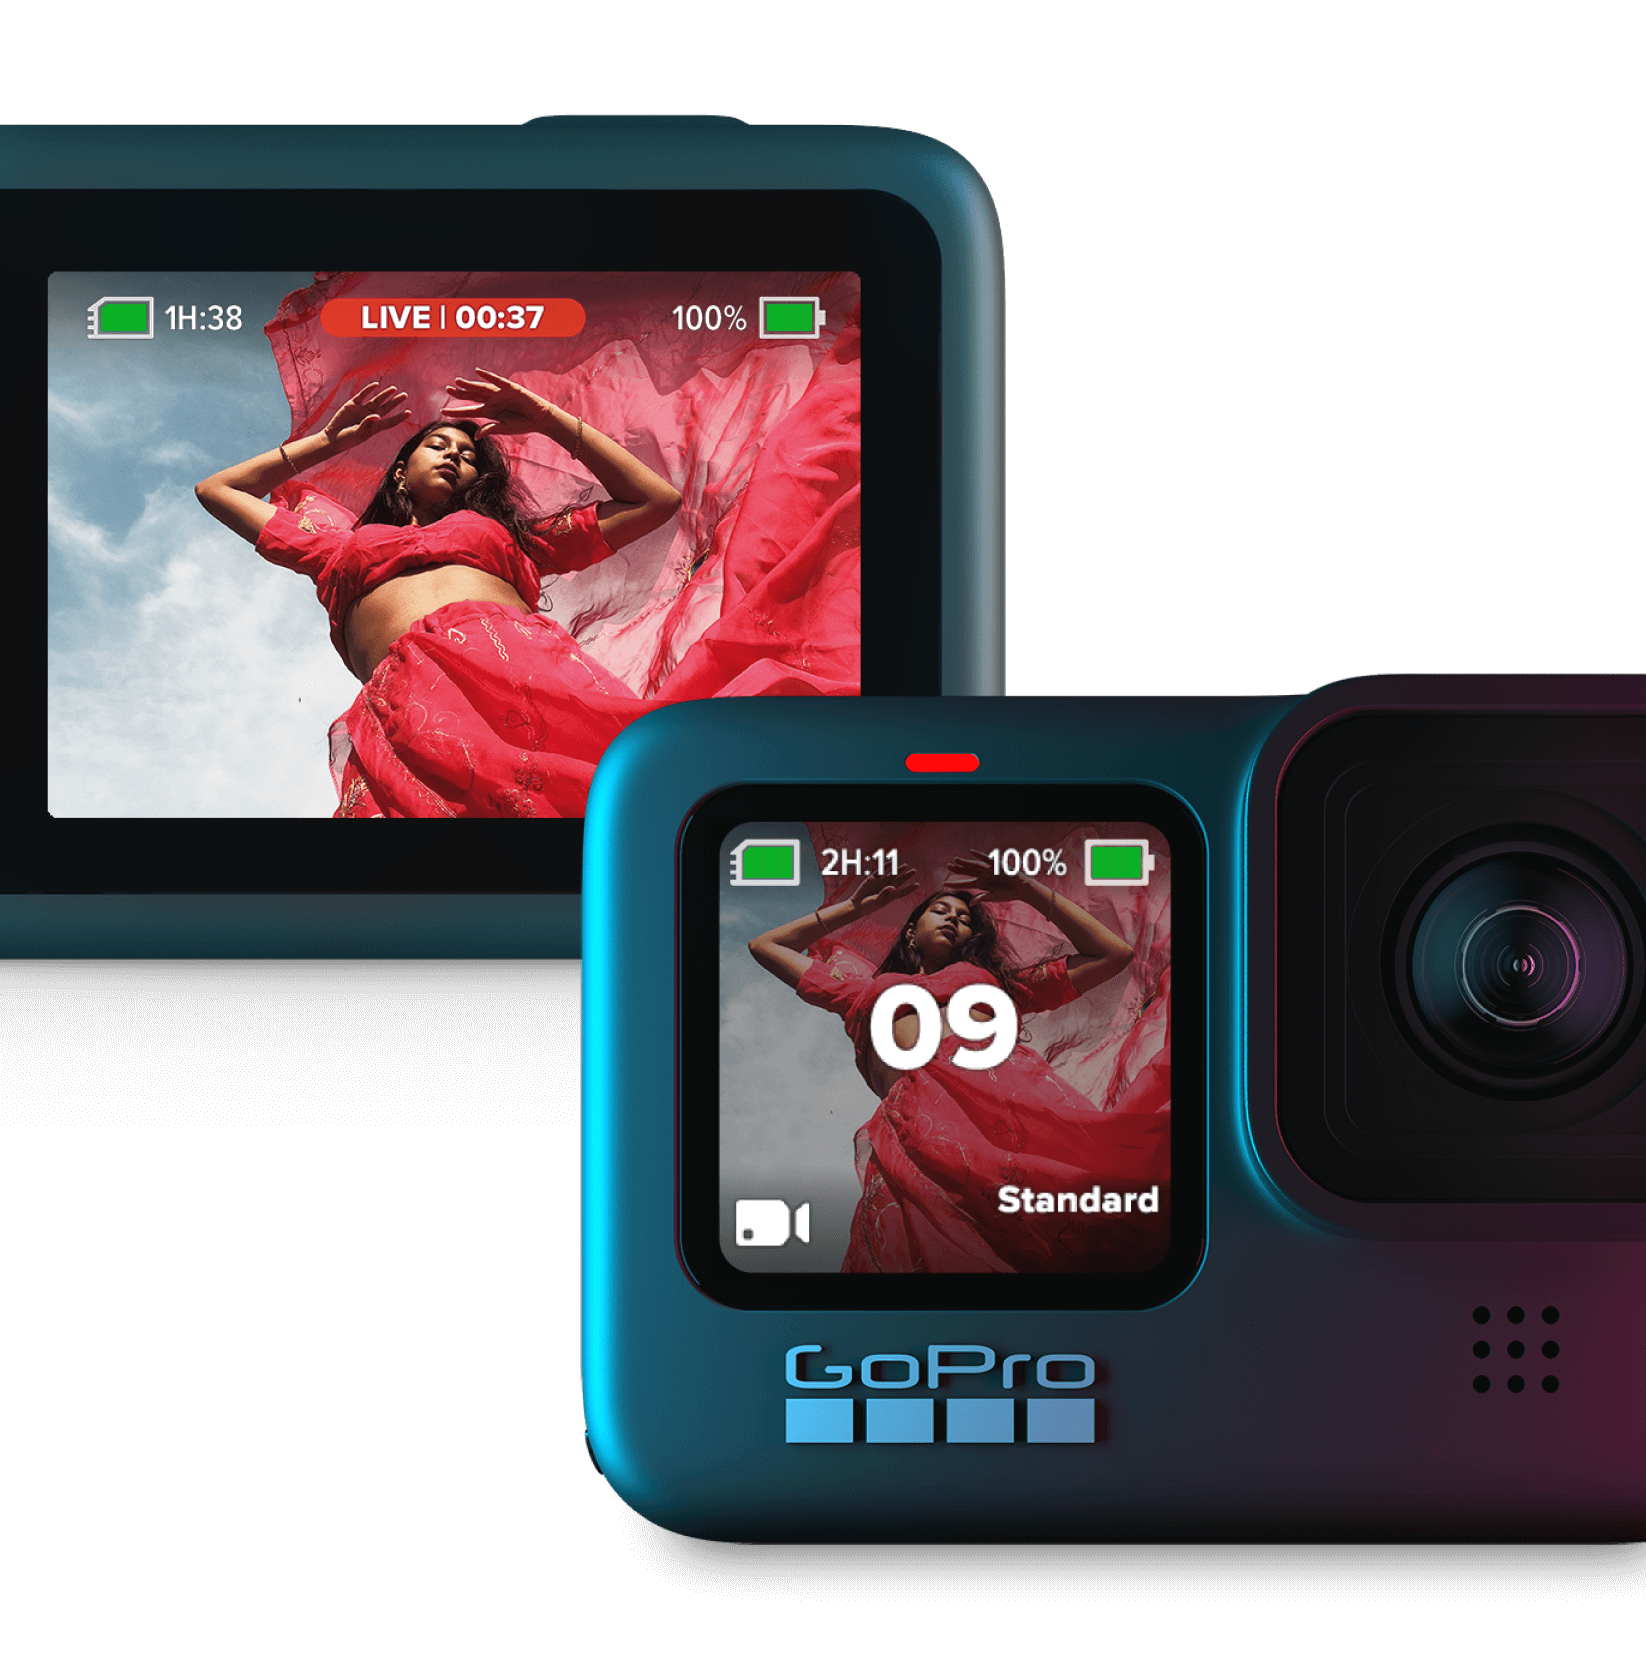 GoPro Hero9 With 5k Video Record & Front Display Now Available for